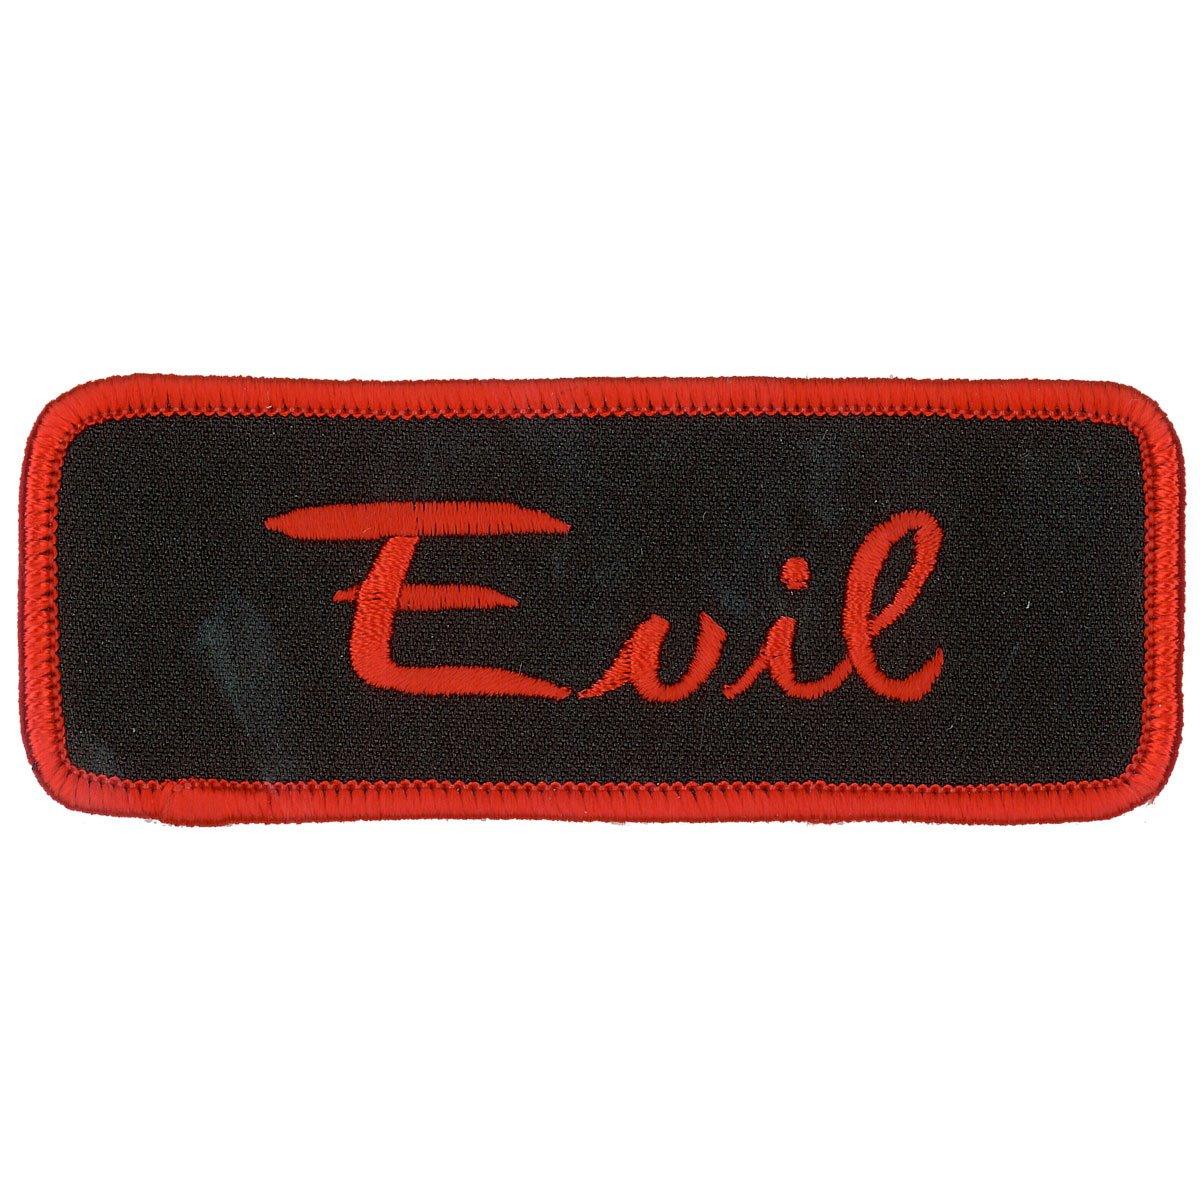 Hot Leathers 4" Evil Patch - American Legend Rider